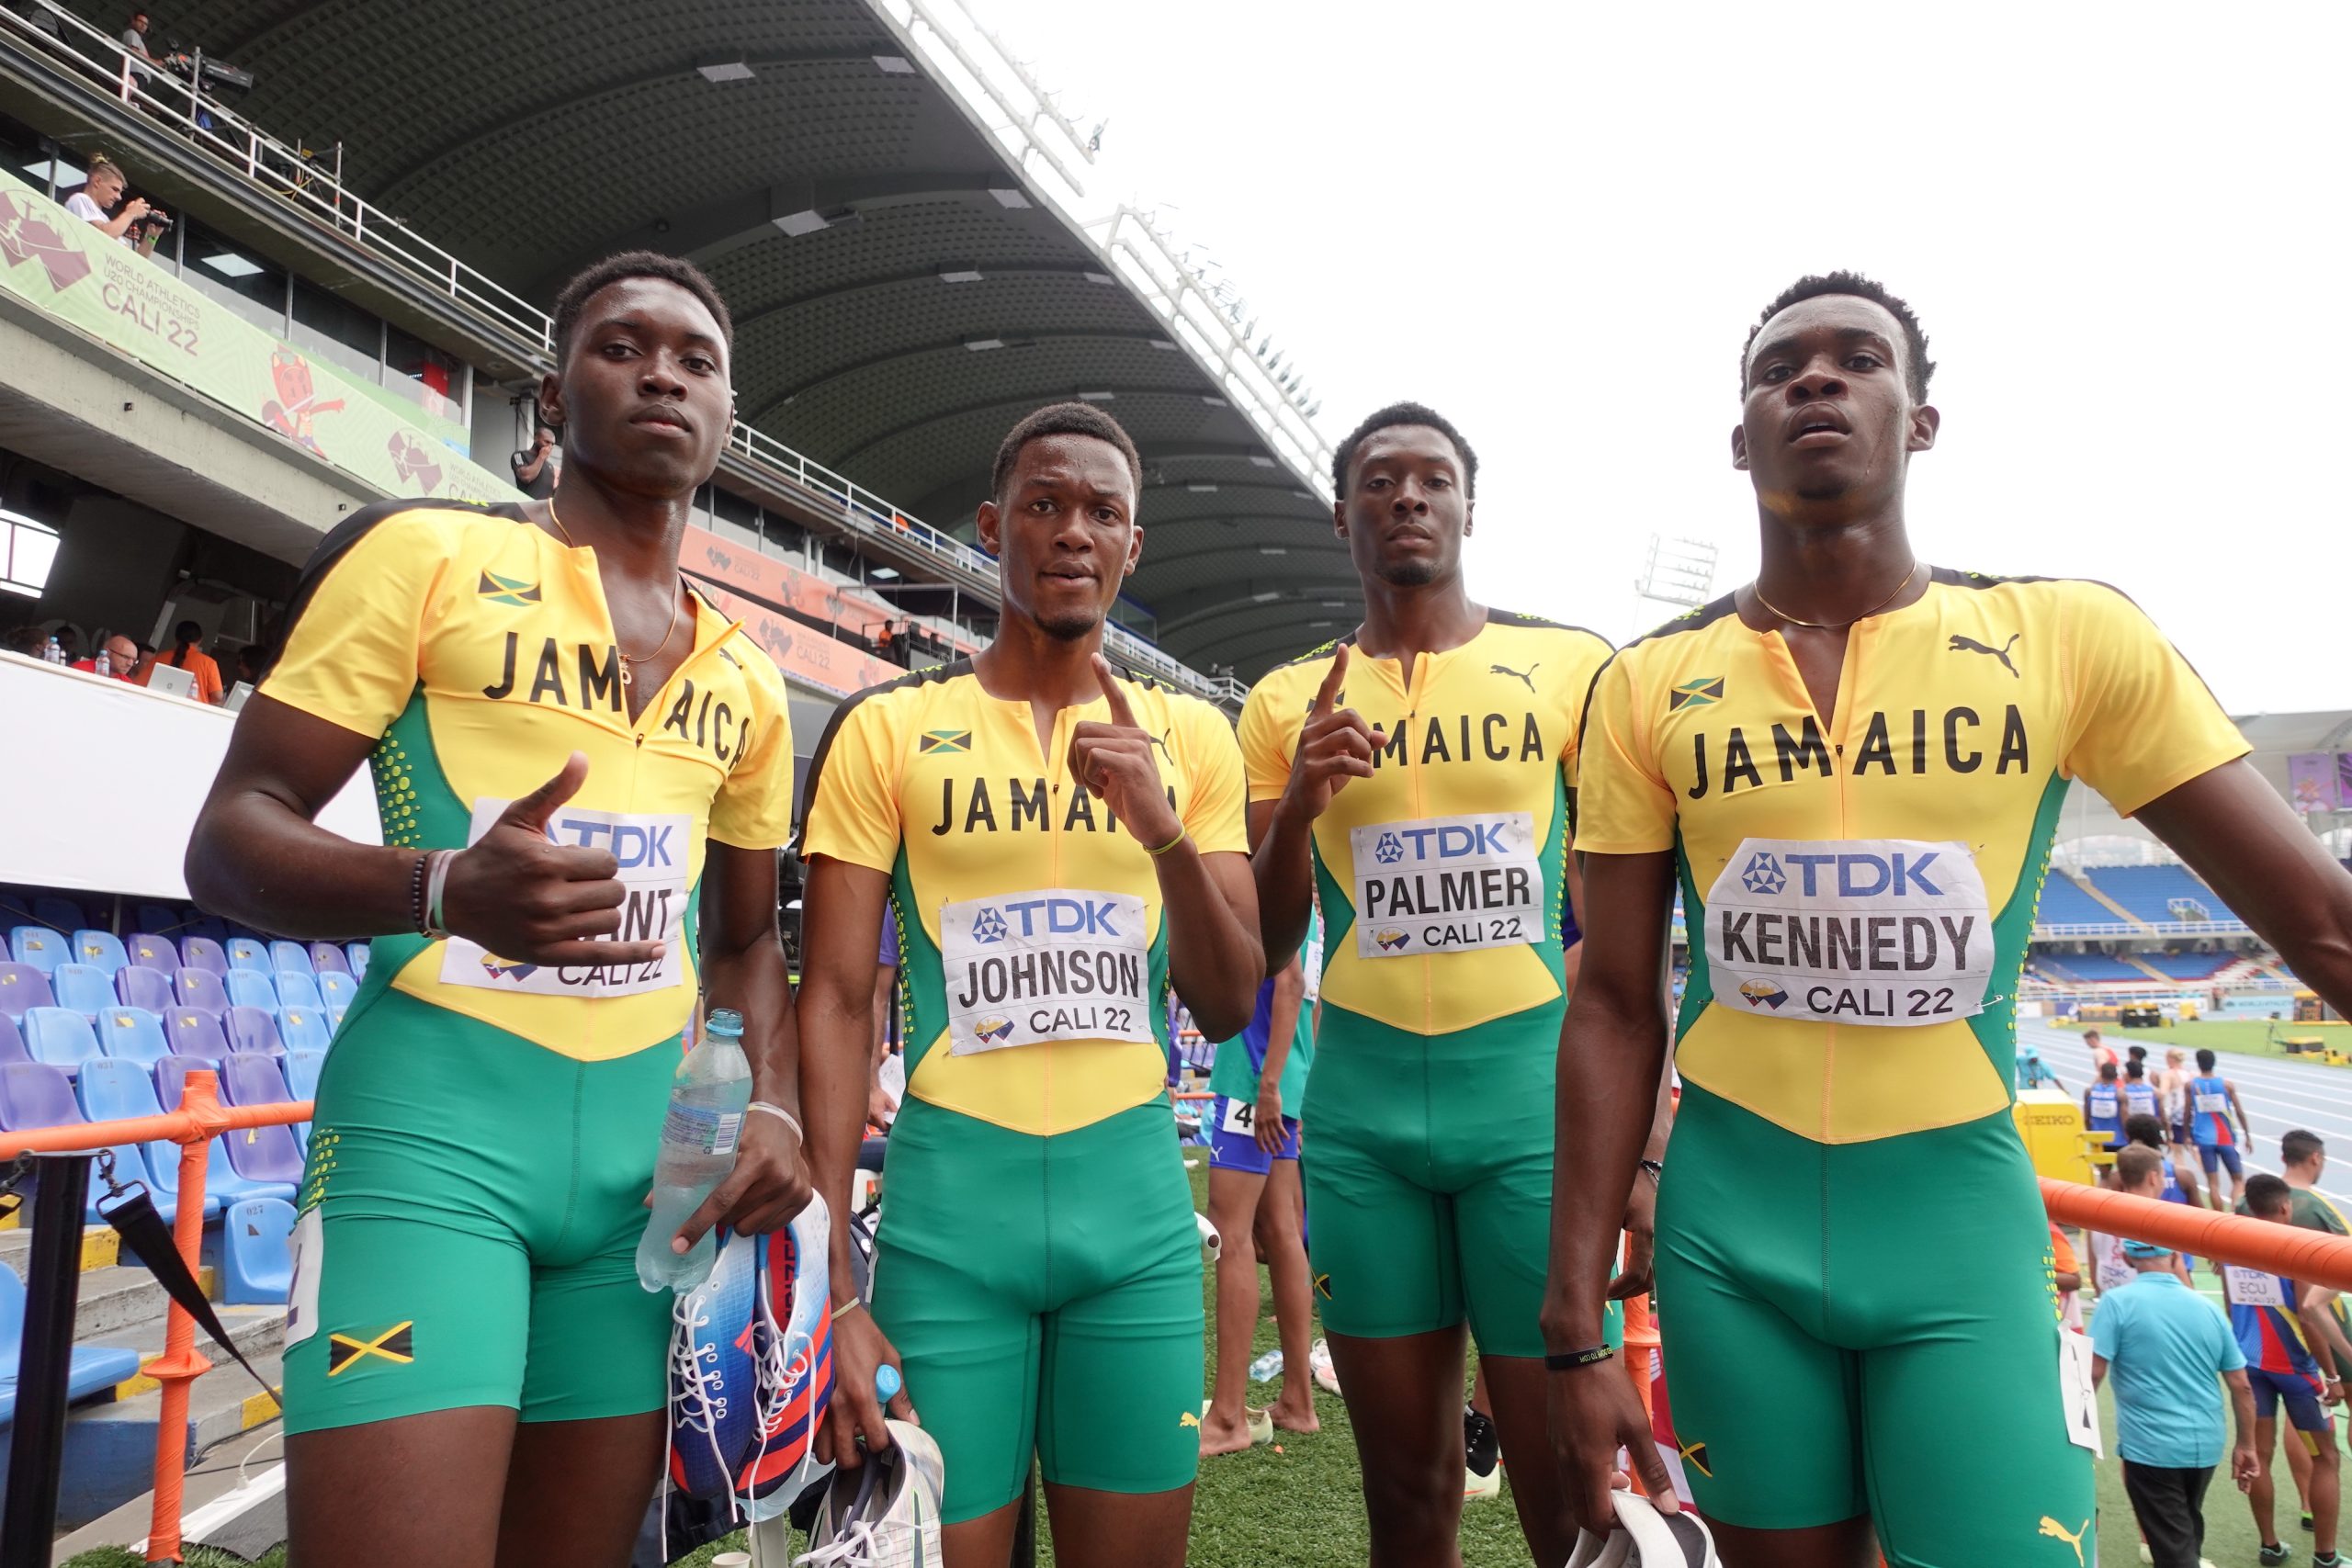 amaica men's 4x400m team of Malachi Johnson, Delano Kennedy, Derrick Grant and Shemar Palmer advanced to the final after winning their semi-final heat in 3:07.32